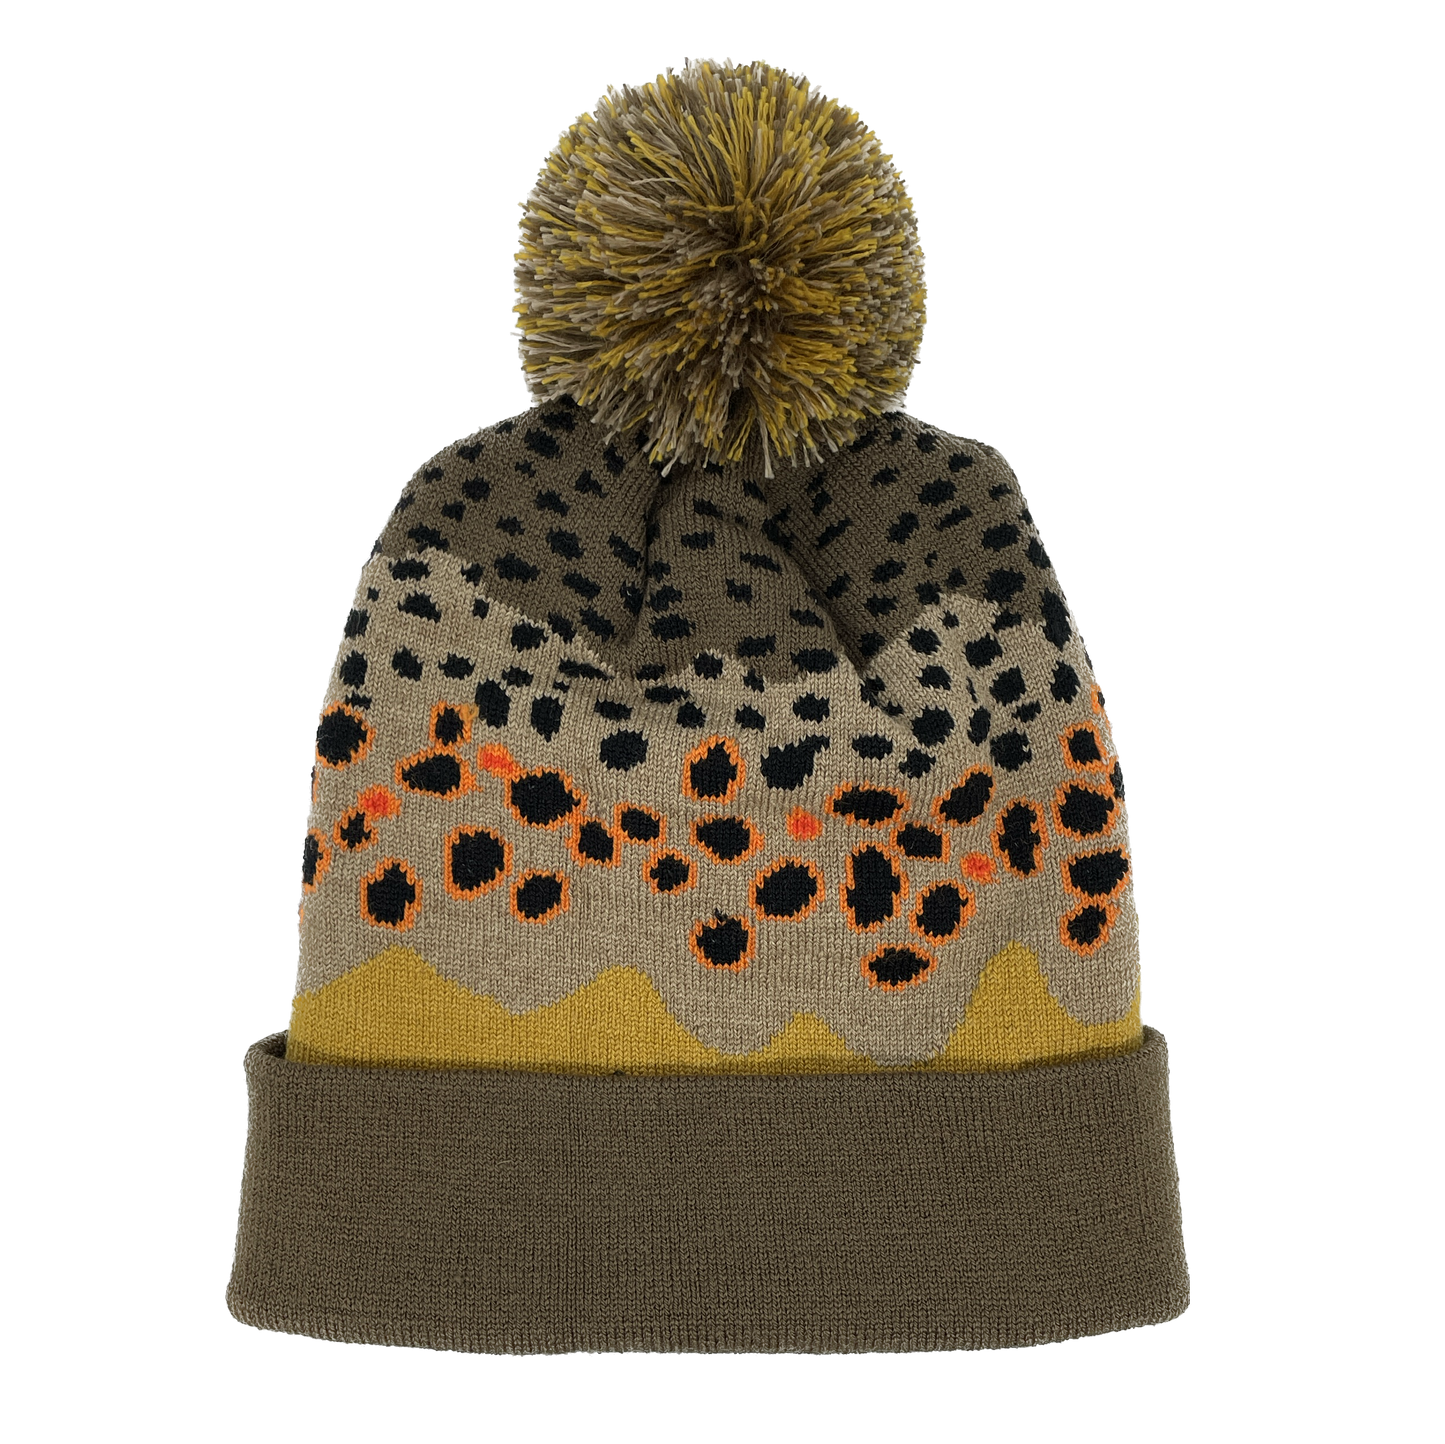 A winter hat with a brown cuff and the pattern of brown trout skin and a poof on top